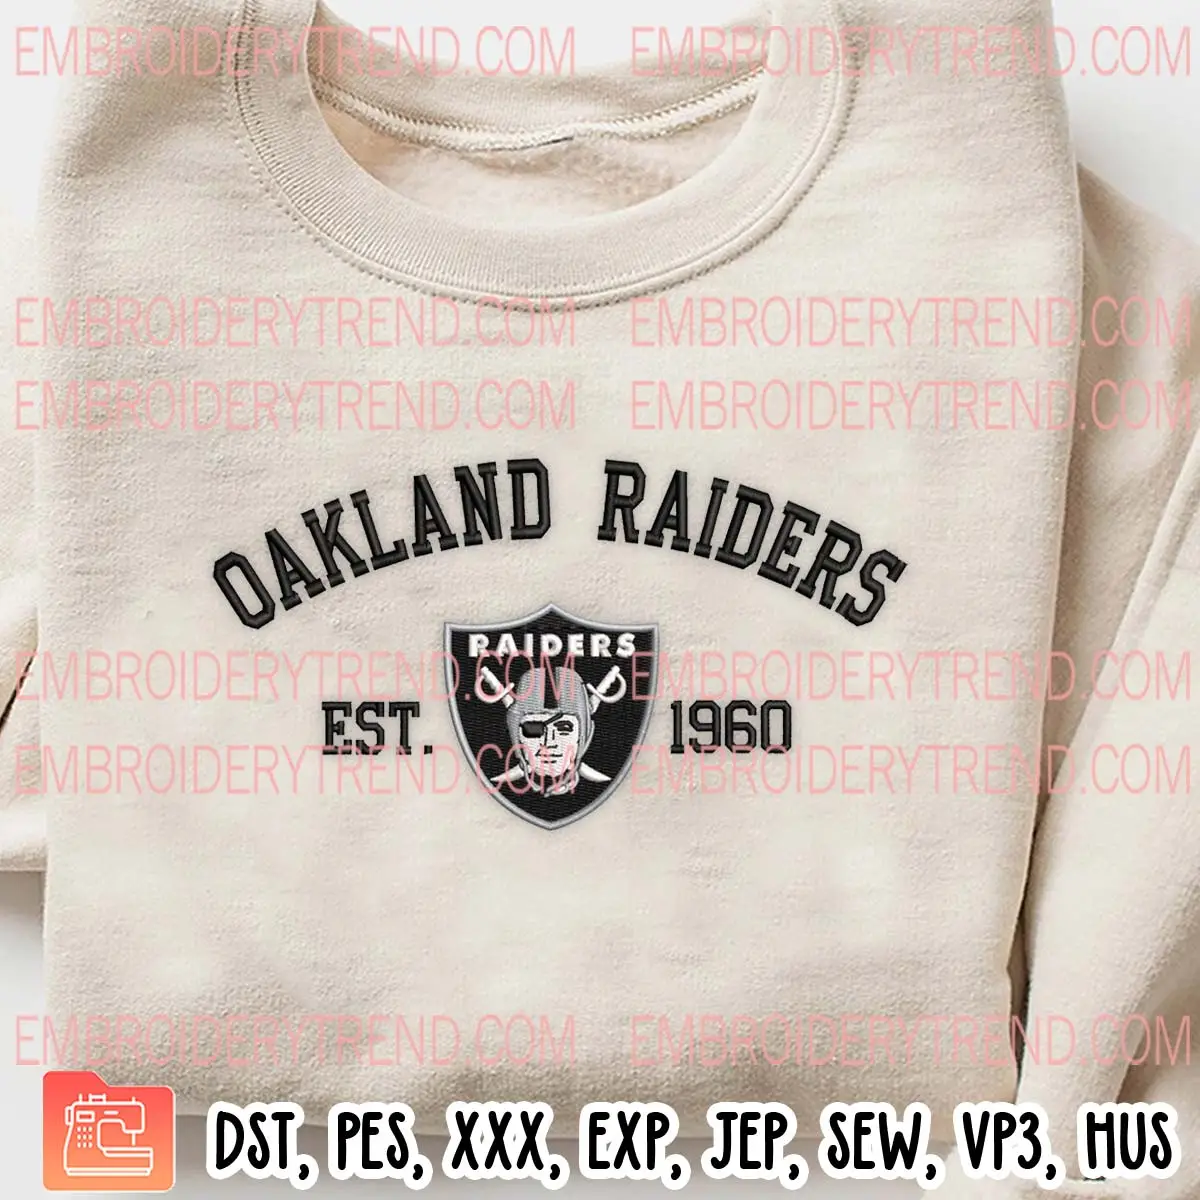 Oakland Raiders Est 1960 Embroidery Design, American Football Machine Embroidery Digitized Pes Files